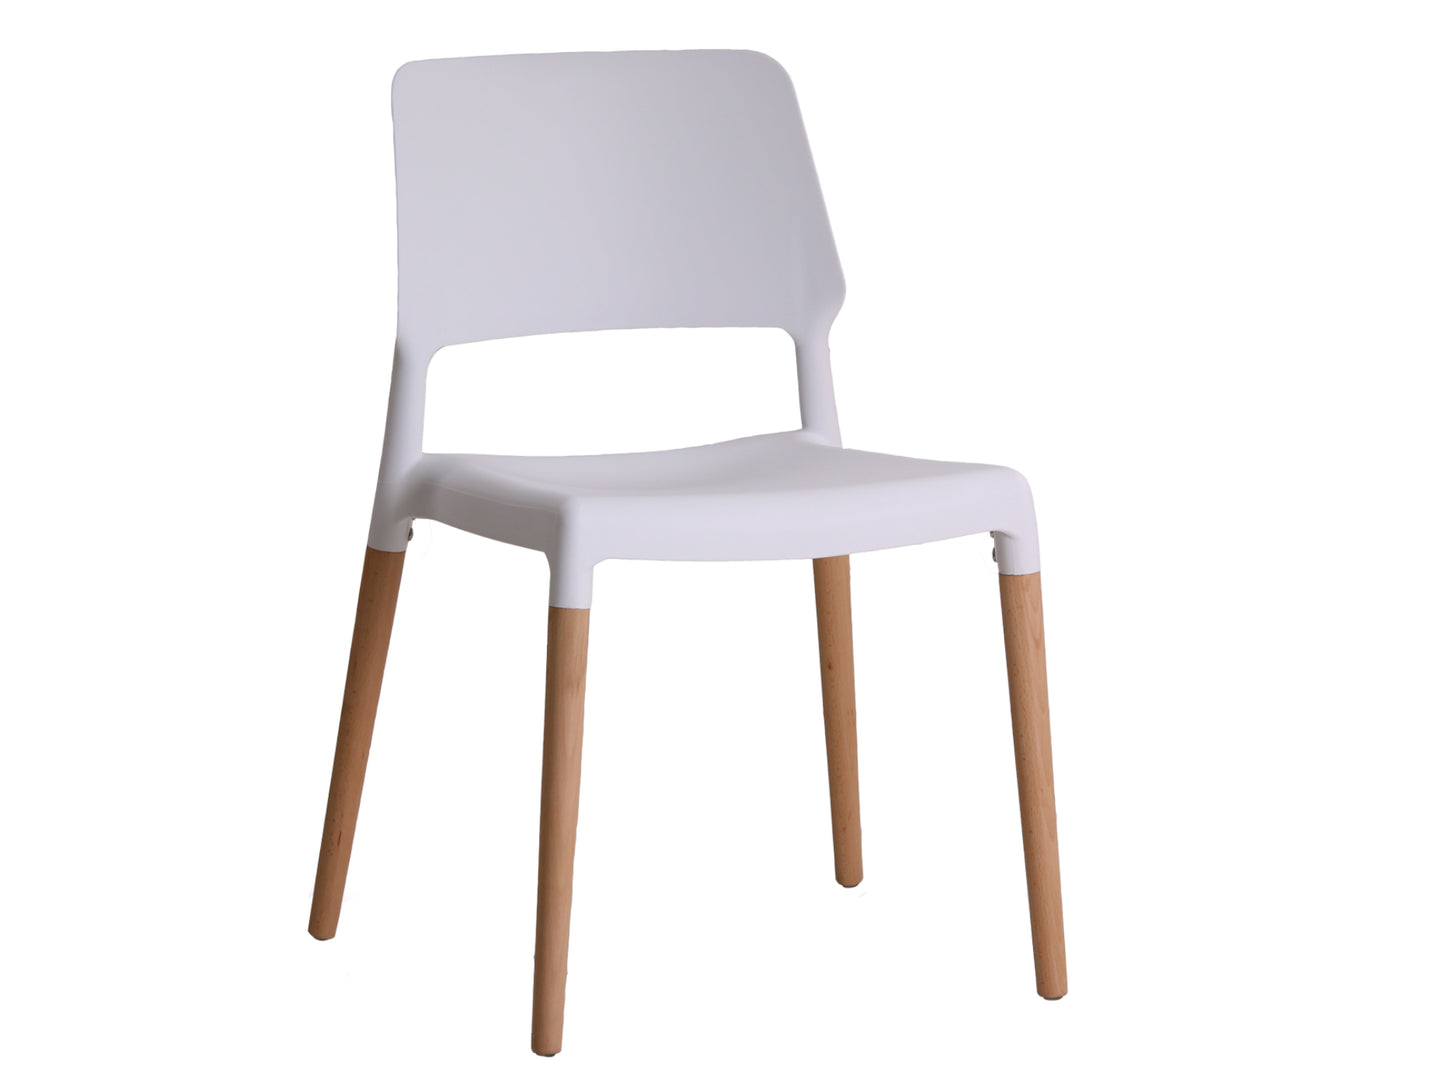 Riva Dining Chair in White (2 Pack)